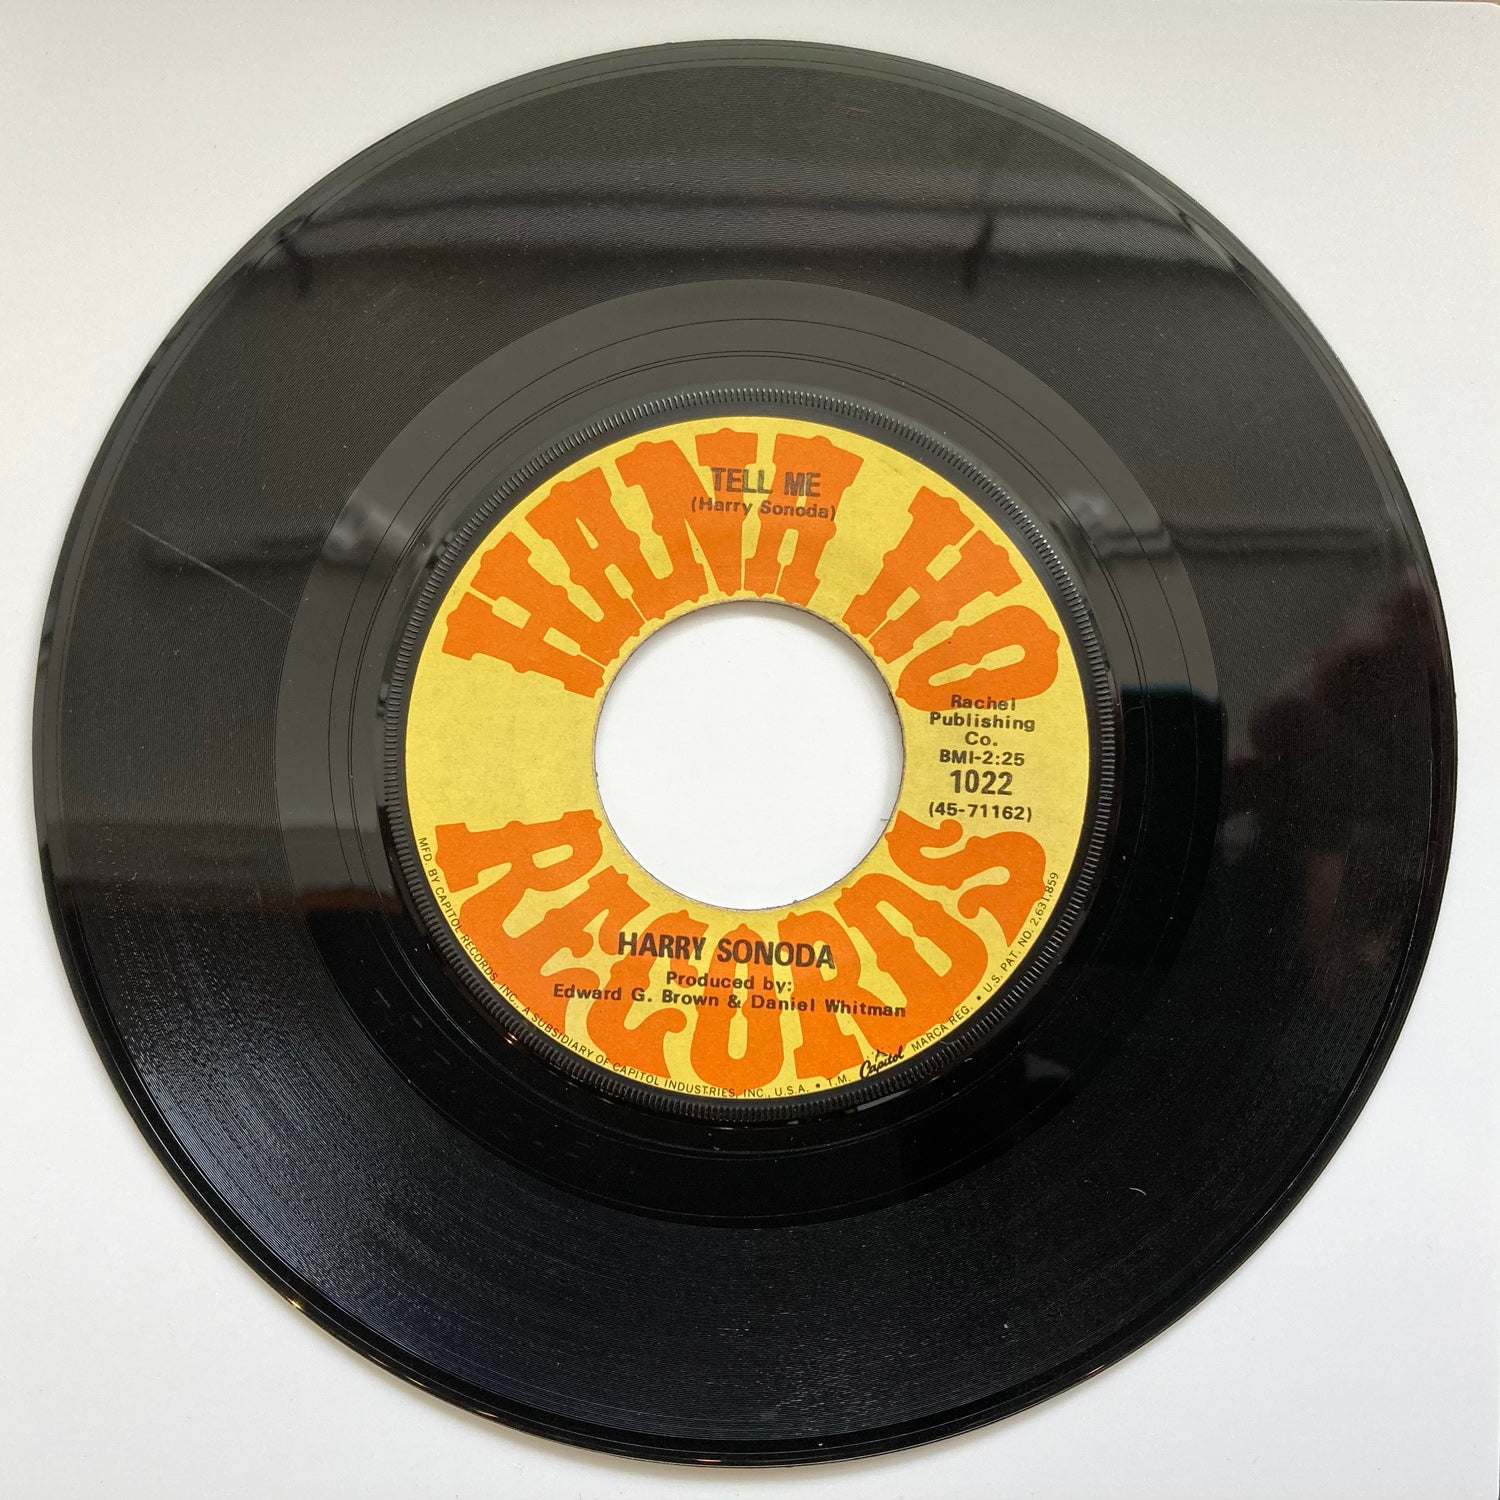 Harry Sonoda - Tell Me / You Don't Need A Mind Just Soul (7")